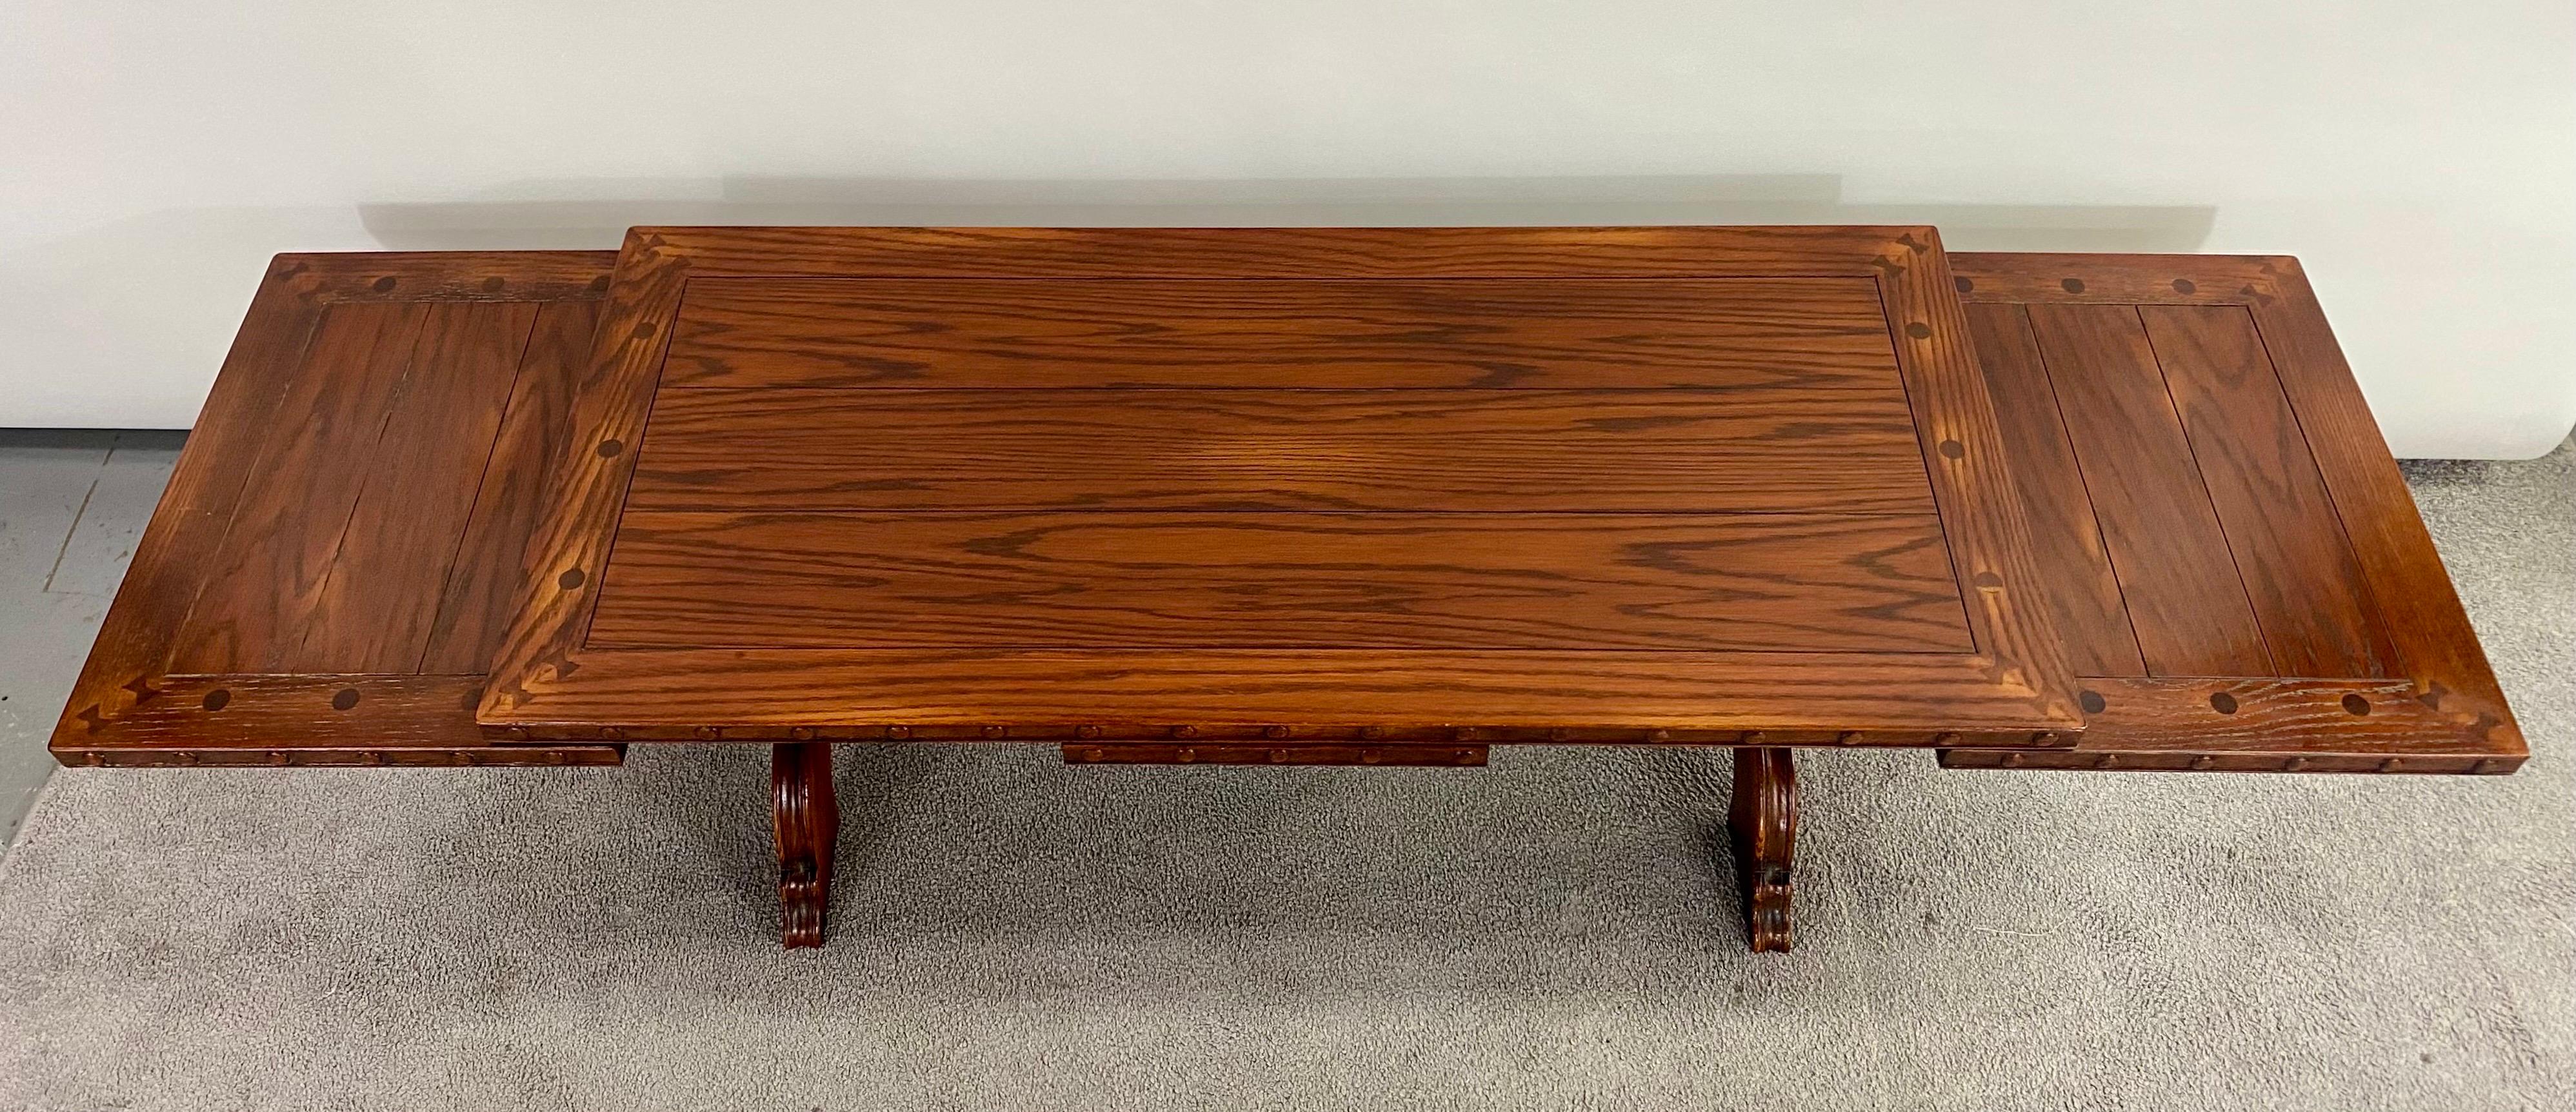 Antique Regency Style Rosewood Coffee or Cocktail Table with Two Extensions In Good Condition For Sale In Plainview, NY